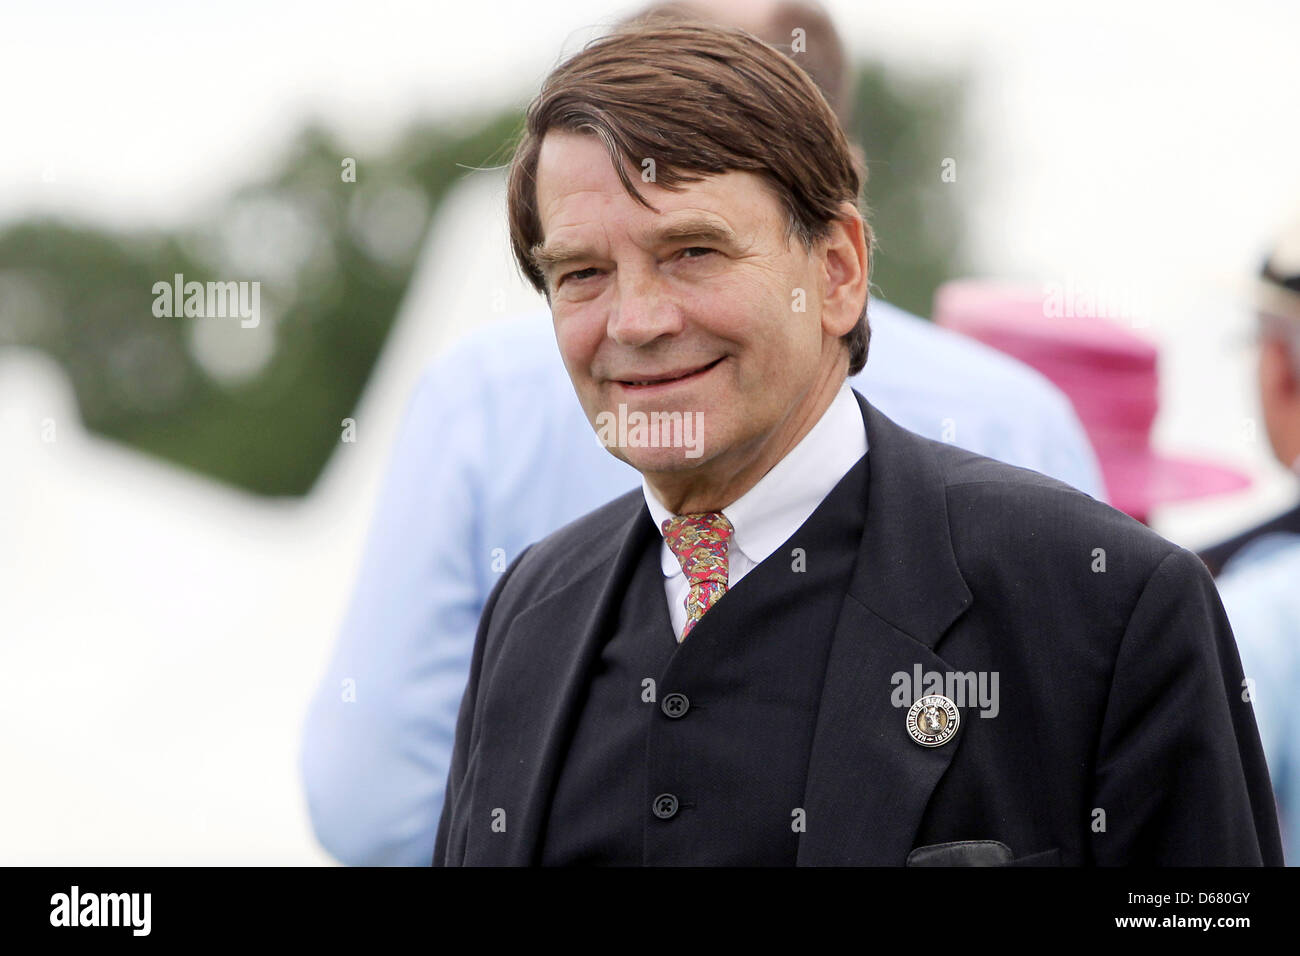 President of the Hamburg racing club Eugen-Andreas Wahler pictured during the 143rd traditional German galopp derby at Hamburg-Horn, Germany, 01 July 2012. Photo: MALTE CHRISTIANS Stock Photo